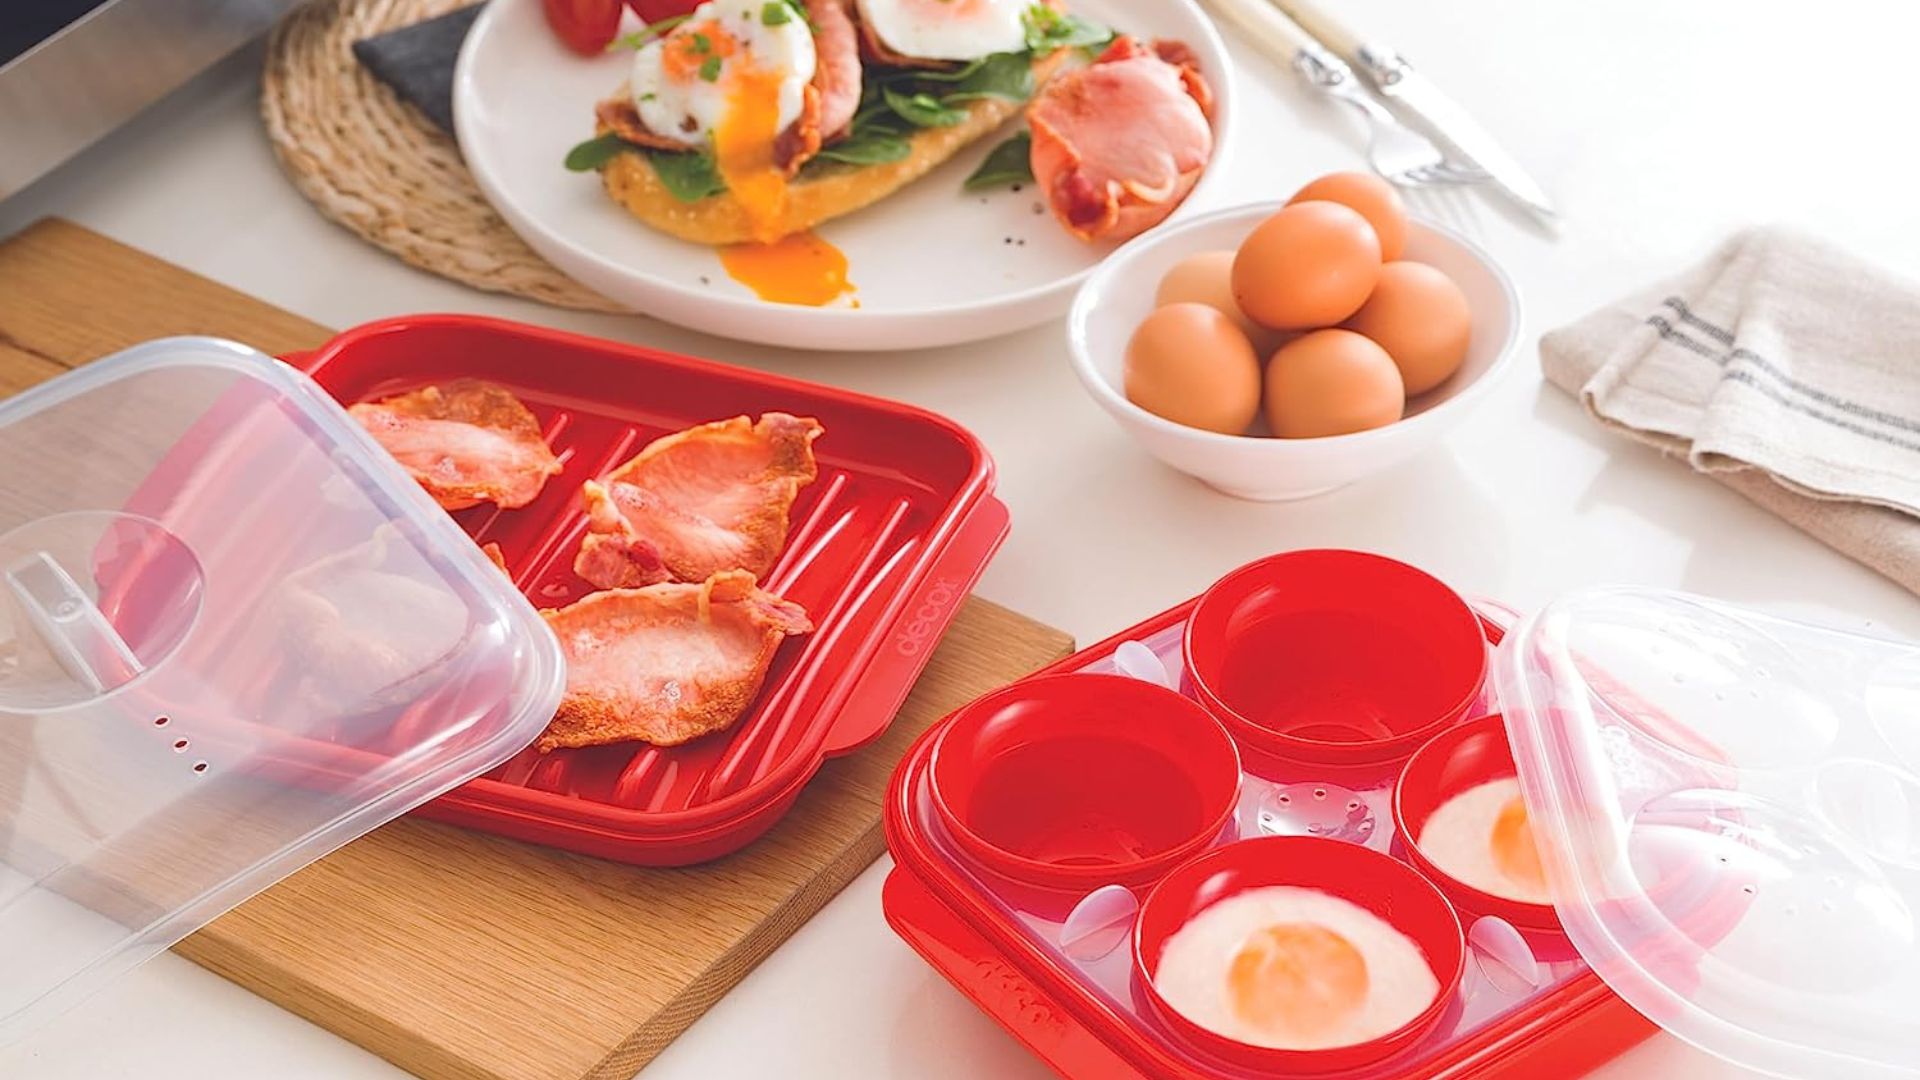 Recreate Café-Worthy Brekkie At Home With This Microwave Egg Poacher